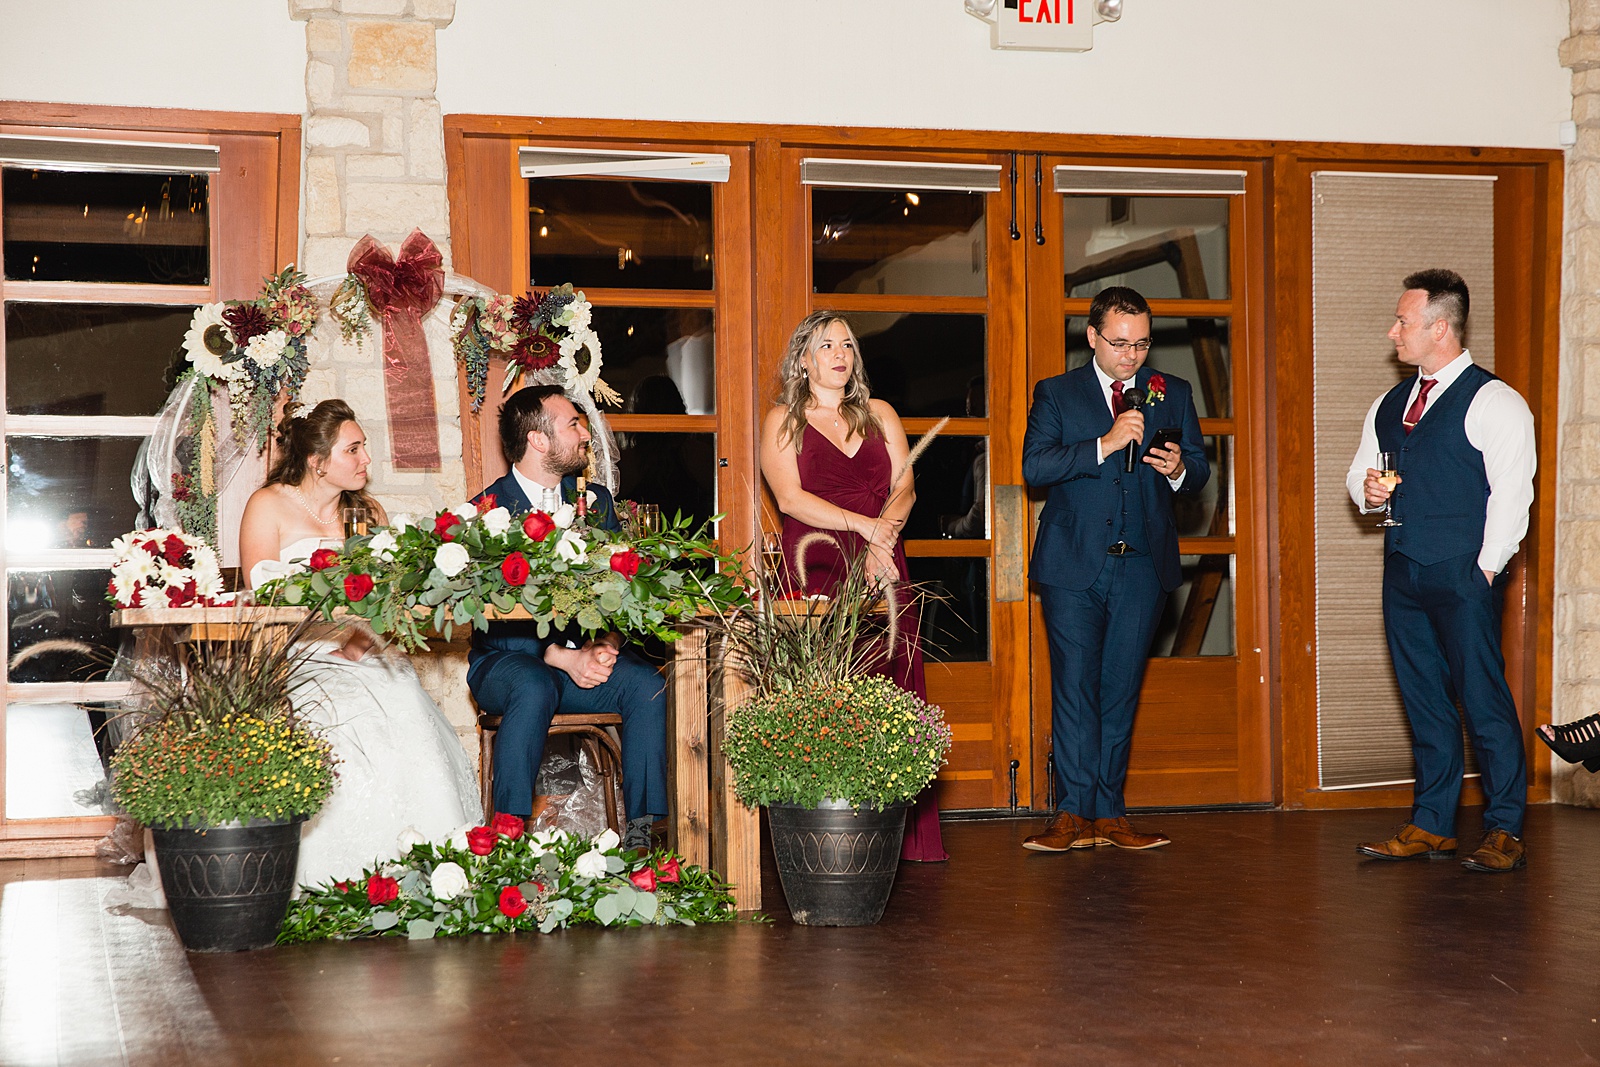 Toasts to the bride and groom at Ocotillo Oasis wedding reception by Phoenix wedding photographer PMA Photography.